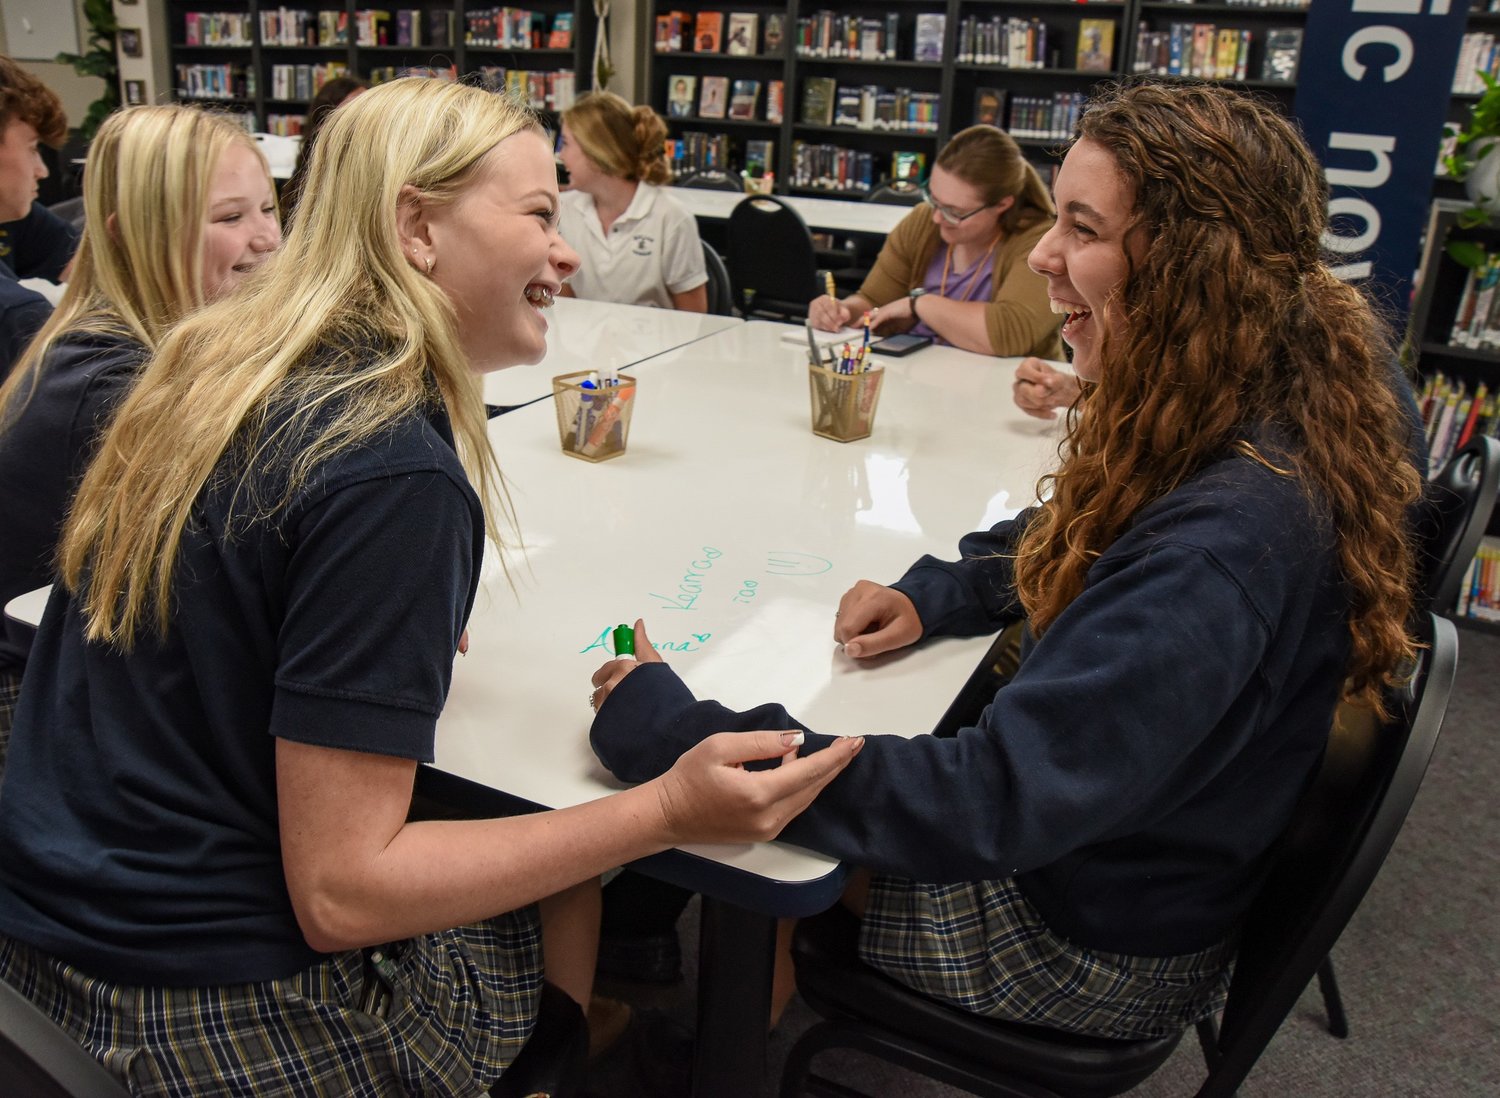 When asked what one of her favorite new foods in America is, Adriano Lozano, right, replied “Pop Tarts,” which drew laughter from her new friends at the table. Lozano has really become a fan of the sweet breakfast pastry. Lozano was staying with host sisters Kearra, middle left, and Cora Steinlage, at left, while attending Helias Catholic High School for seven days.